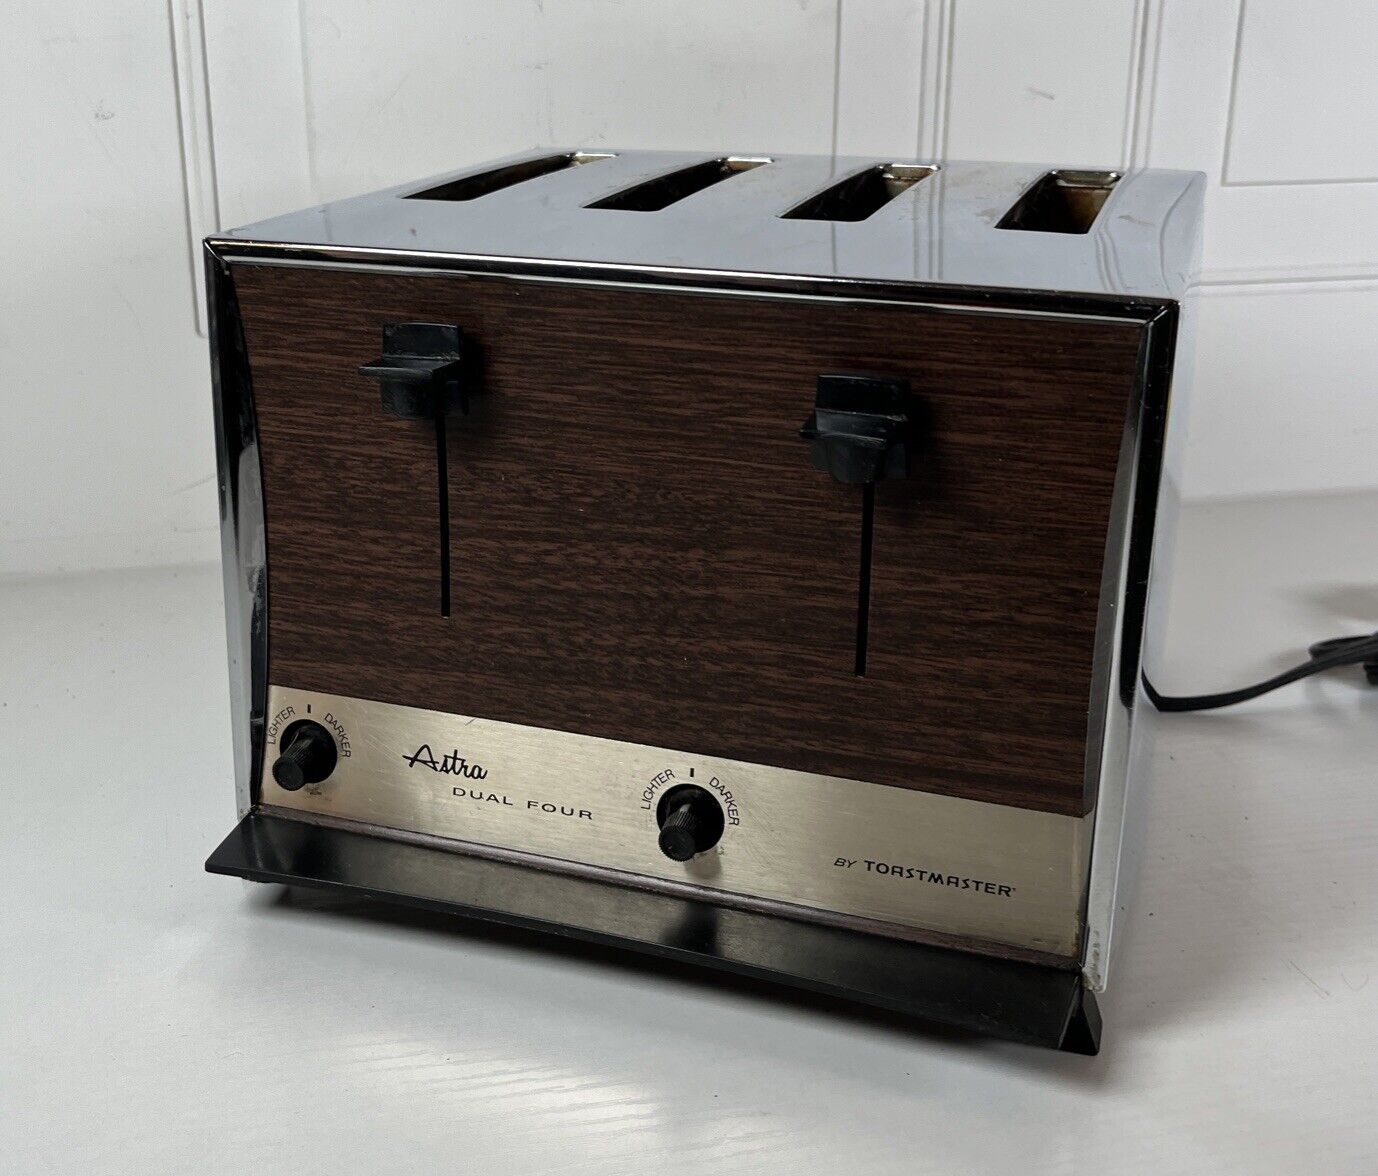 NICE Vintage Retro Astra by Toastmaster 4 Slice Pop-Up Toaster Chrome D130